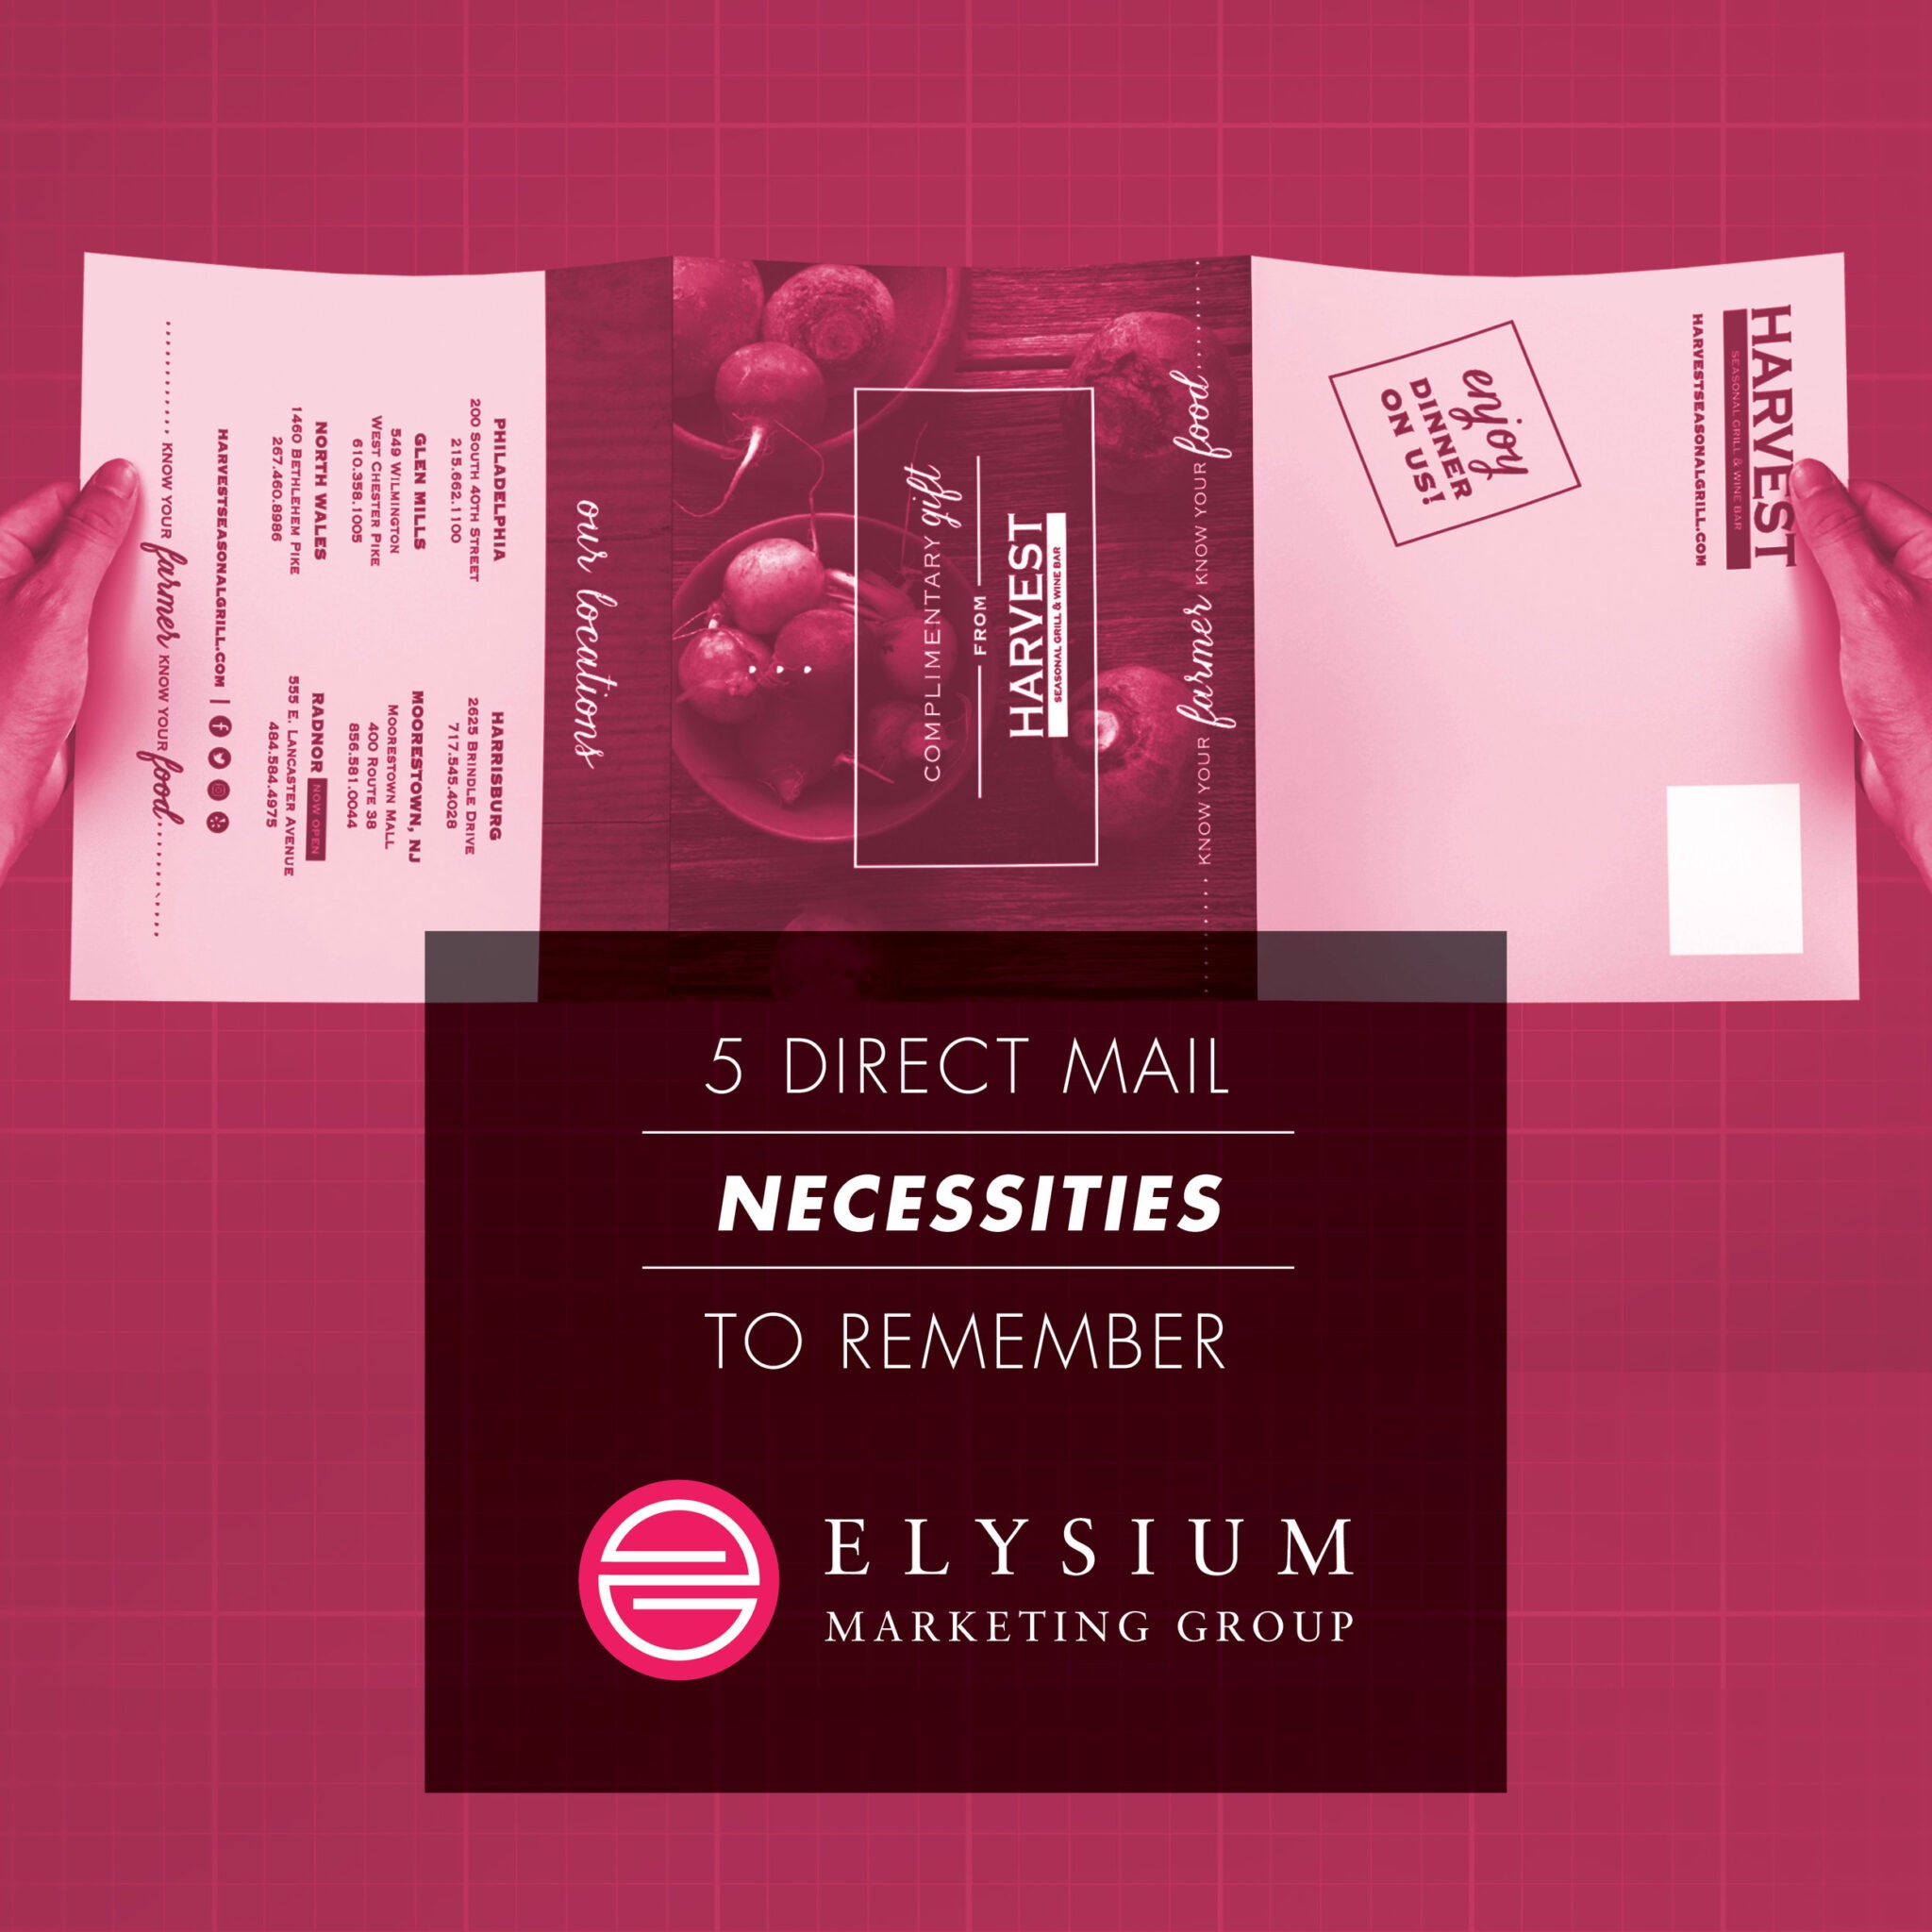 Direct Mail Necessities to Remember by Elysium MG